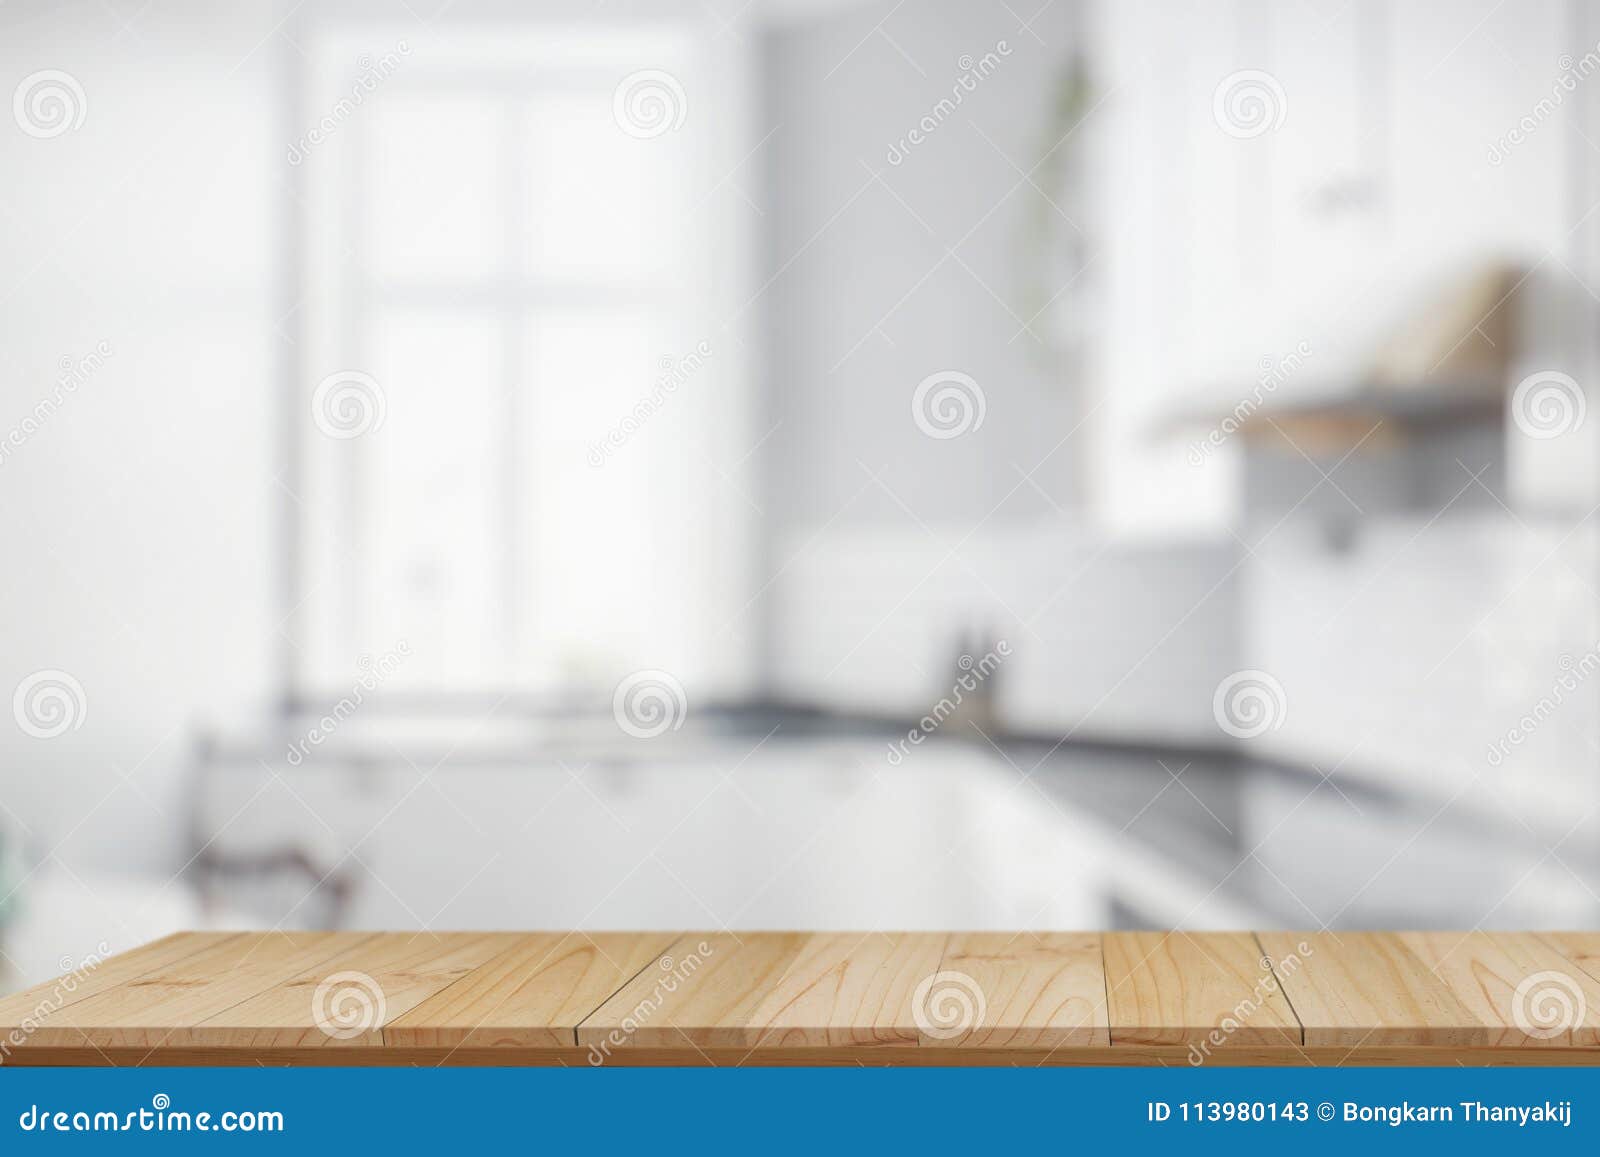 Empty Wooden Table Top and Kitchen Background Stock Image - Image of ...